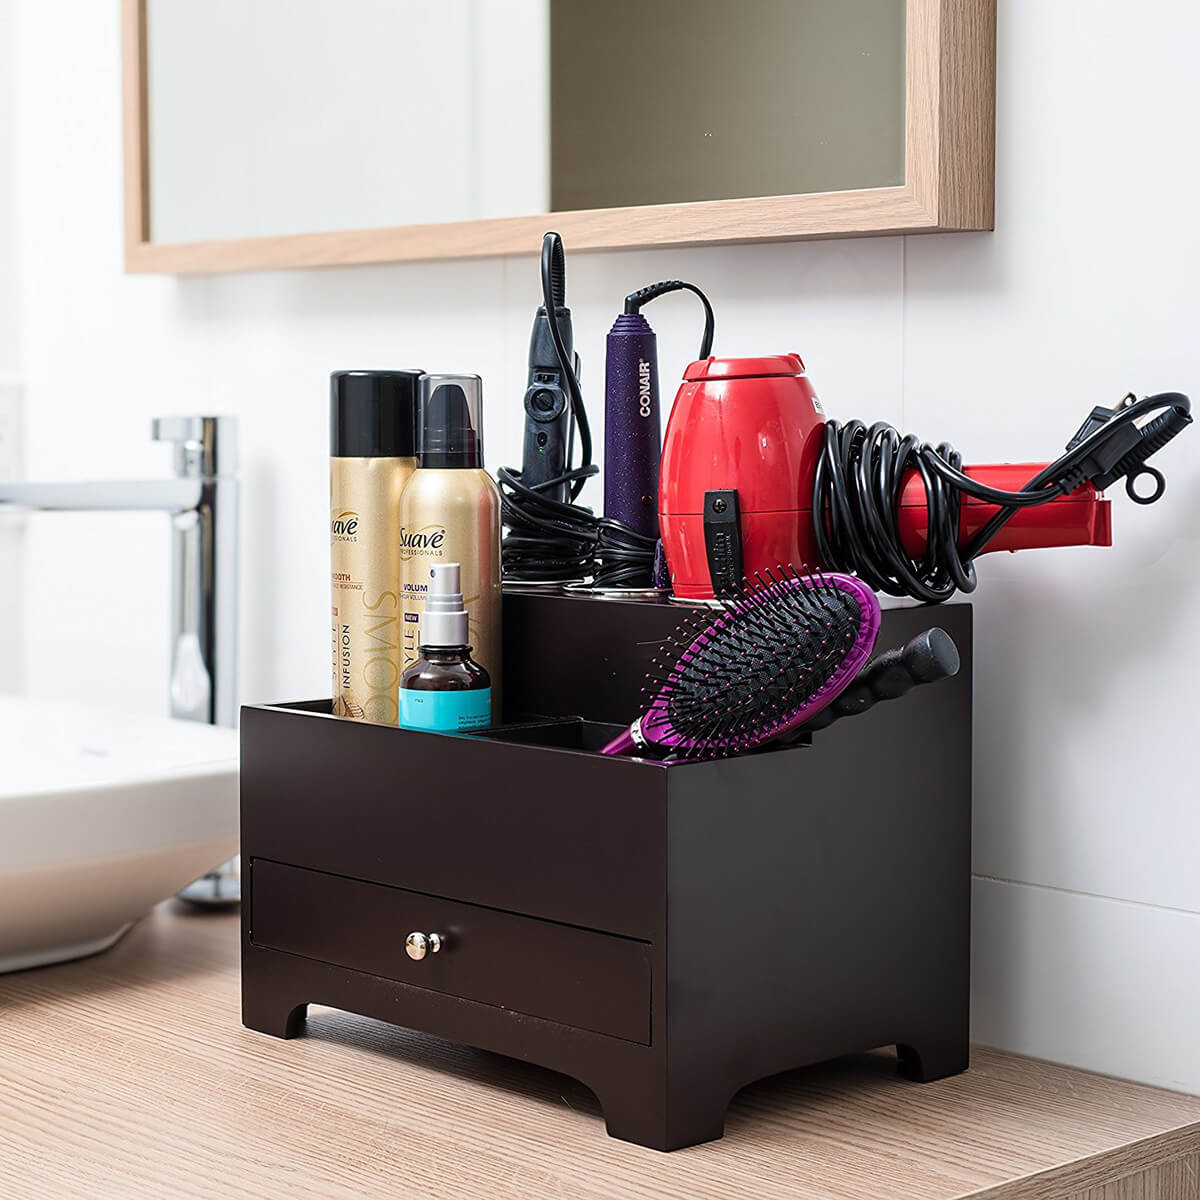 25 Space-Saver Bathroom Organizers That Increase Storage Without Remodeling